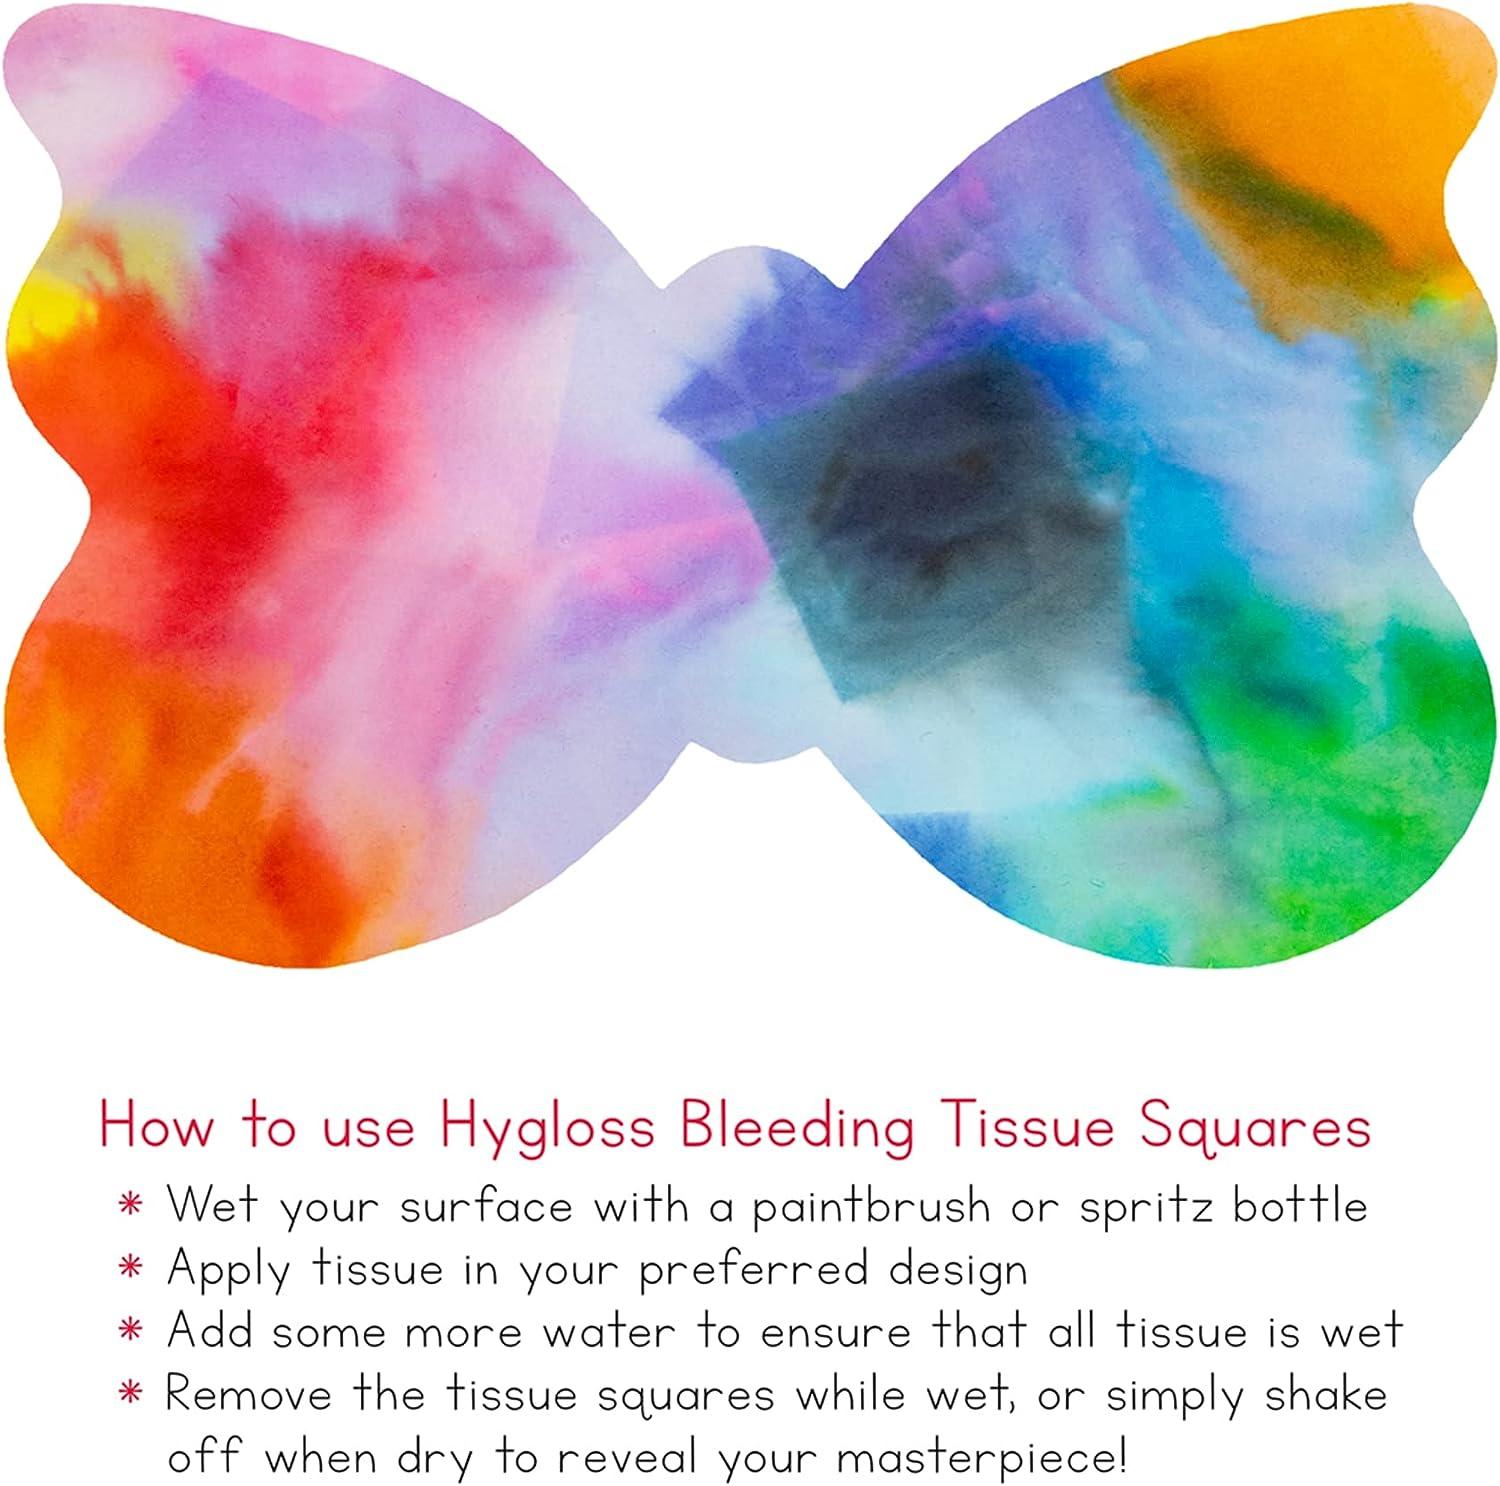  Hygloss Products Bleeding Tissue Paper Squares 1-Inch, 20  Assorted Colors for Arts & Crafts, DIY Projects, Scrapbooking, Greeting  Cards, 2400 Squares